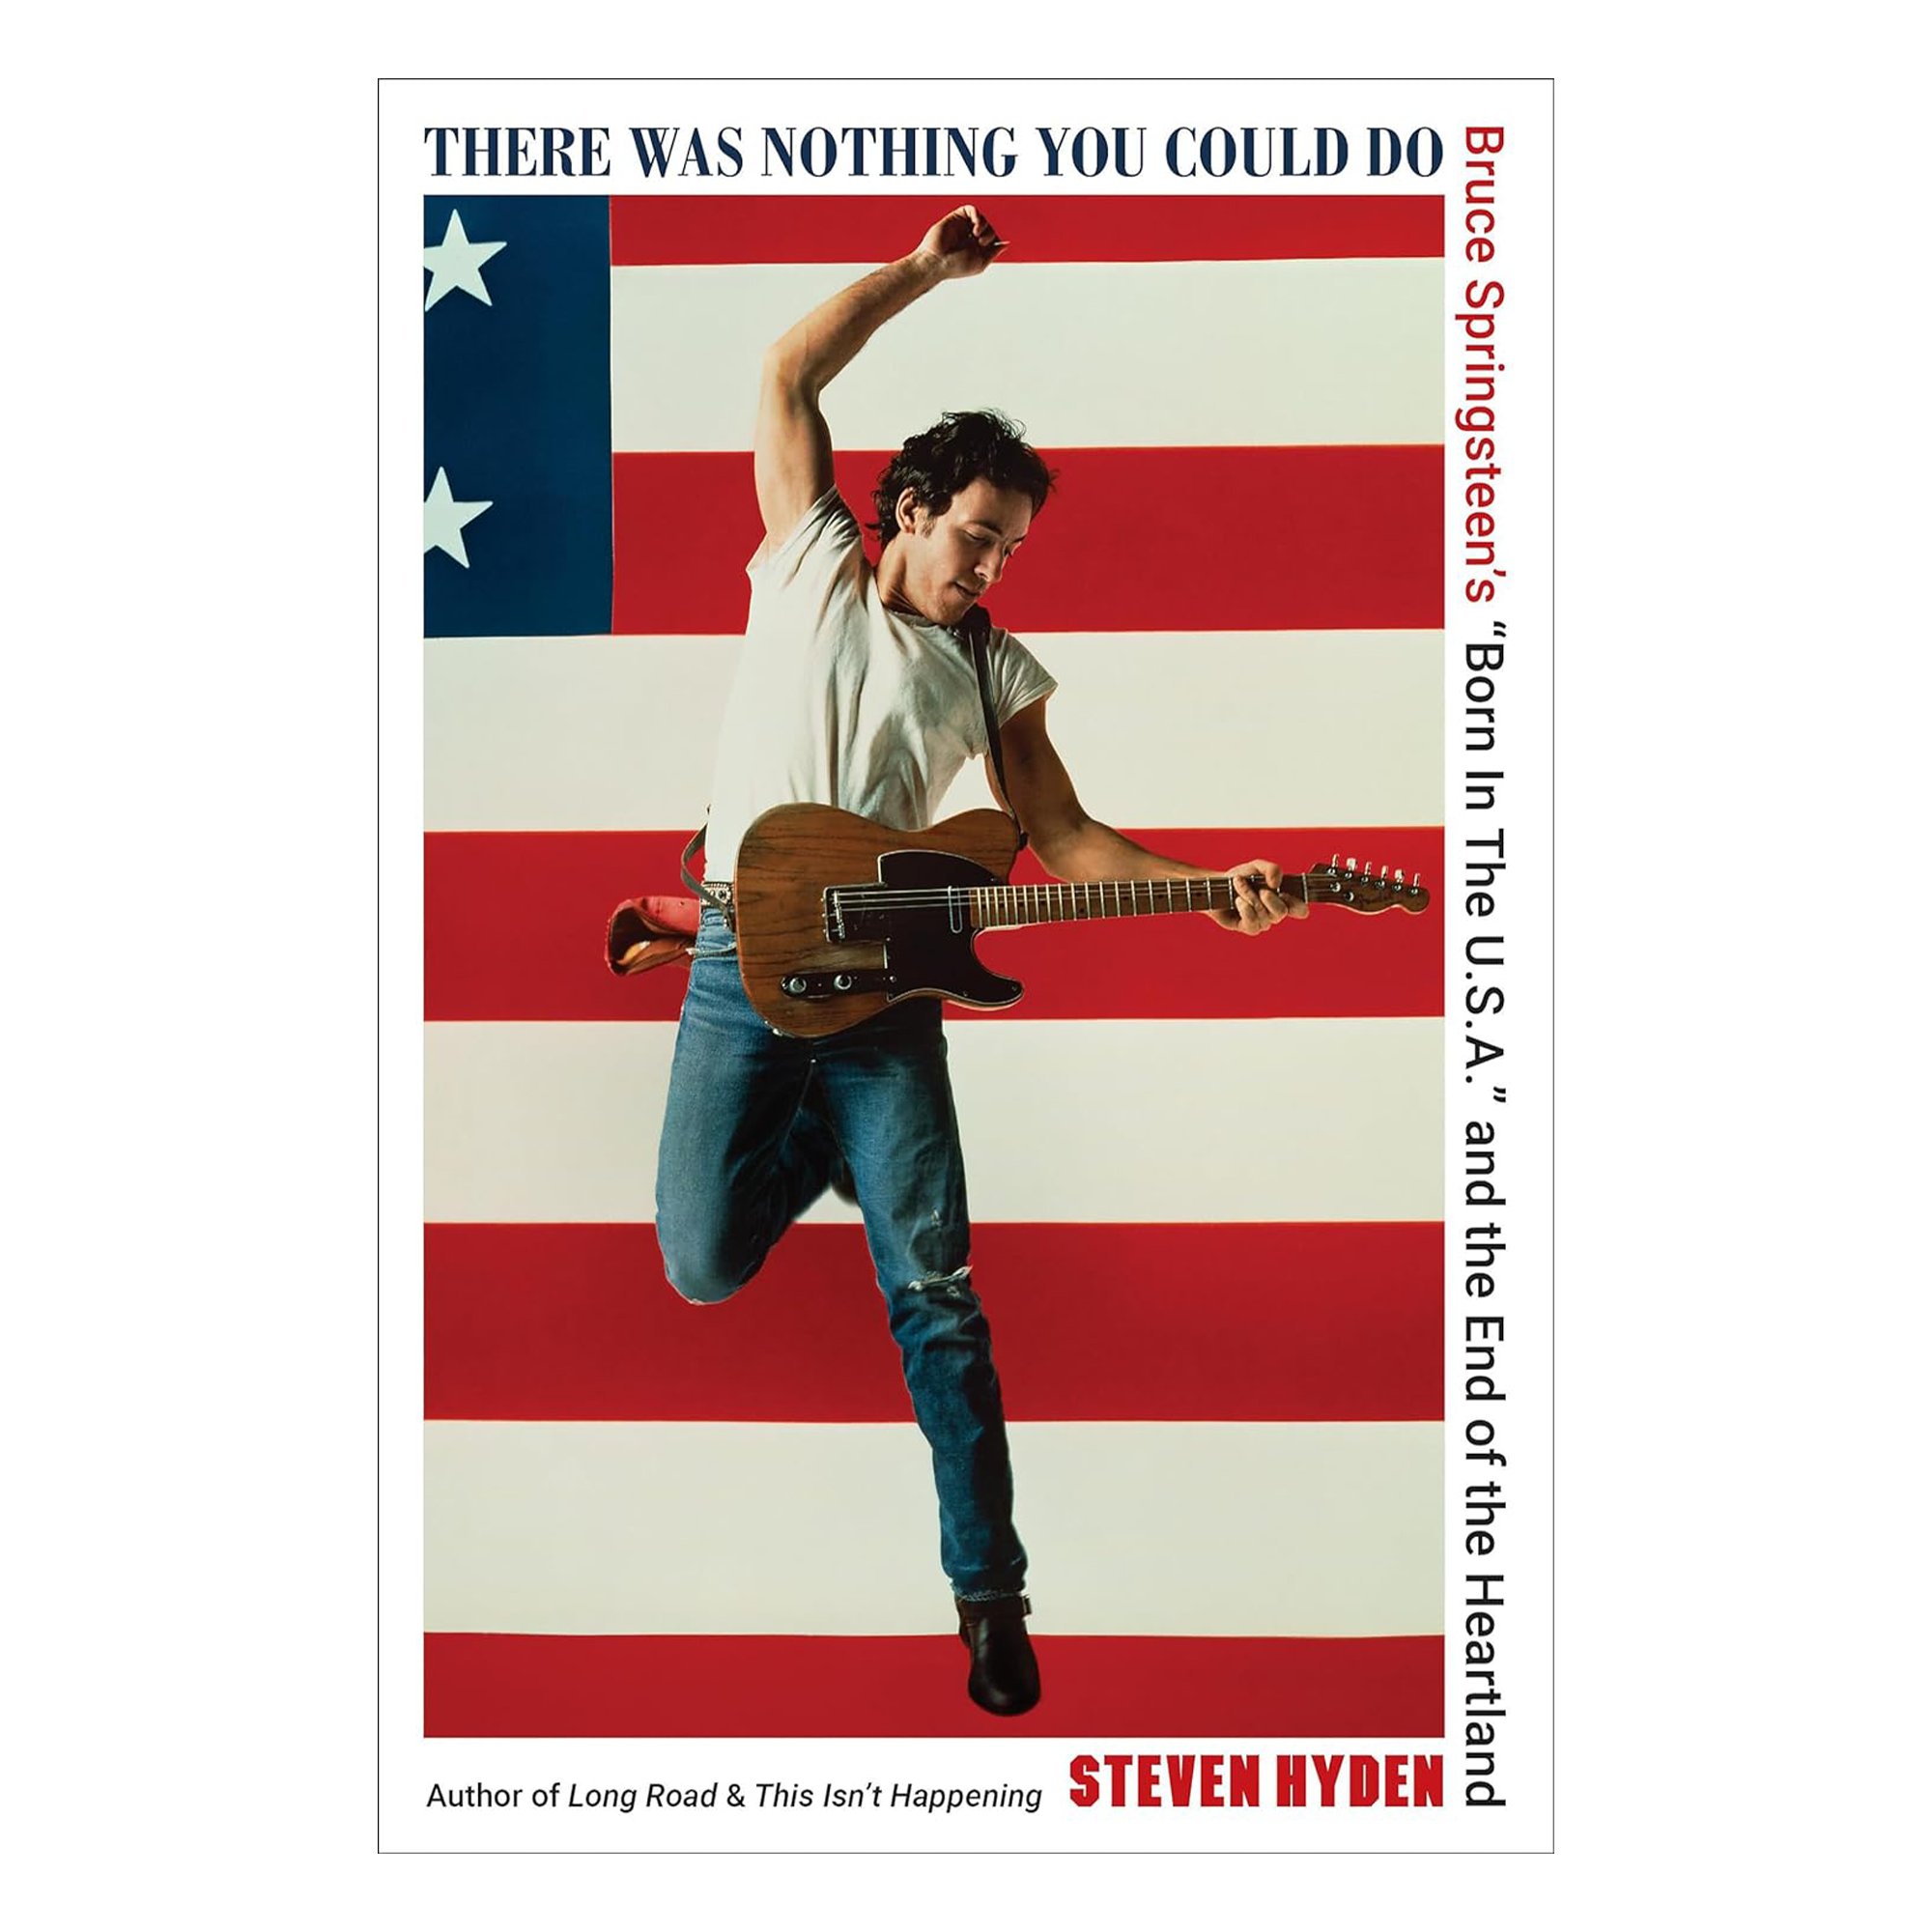 Steven Hyden - There Was Nothing You Could Do - Bruce Springsteen’s “Born In The U.S.A.” and the End of the Heartland: Hardback Book (Signed By The Author Steven Hyden)